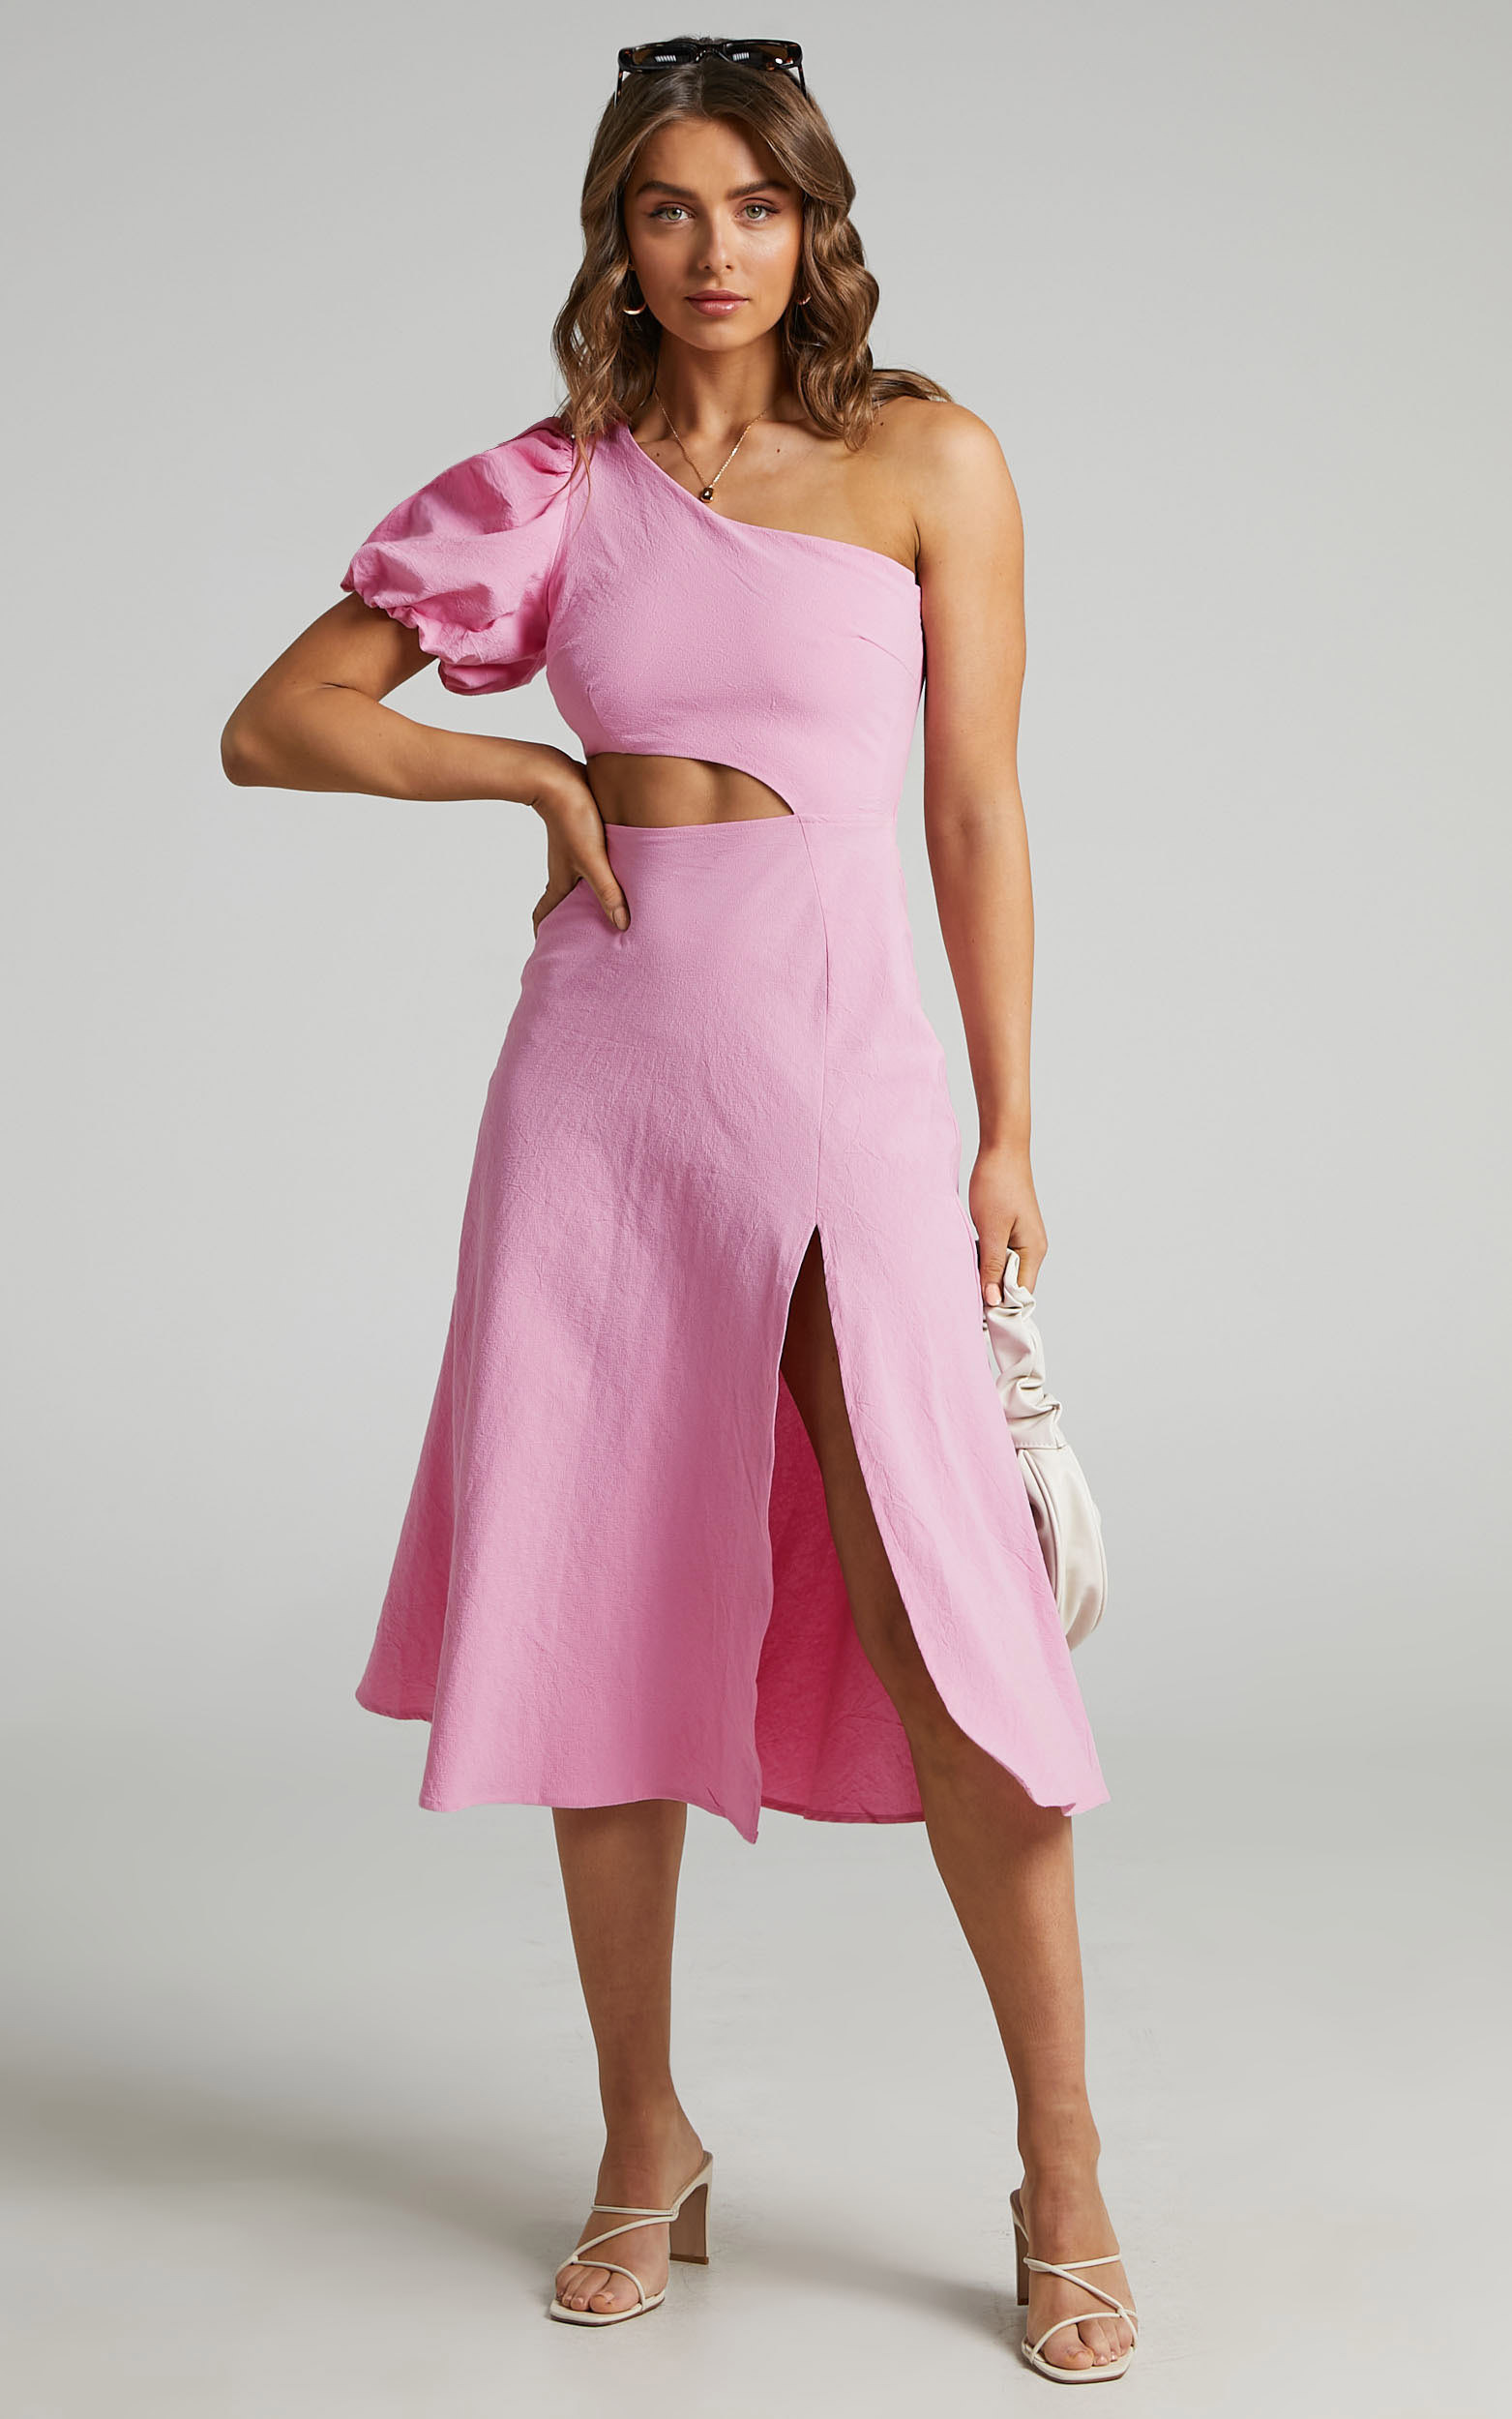 Marcia One Shoulder Midi Dress with Side Cut Out in Pink Linen Look - 04, PNK2, hi-res image number null